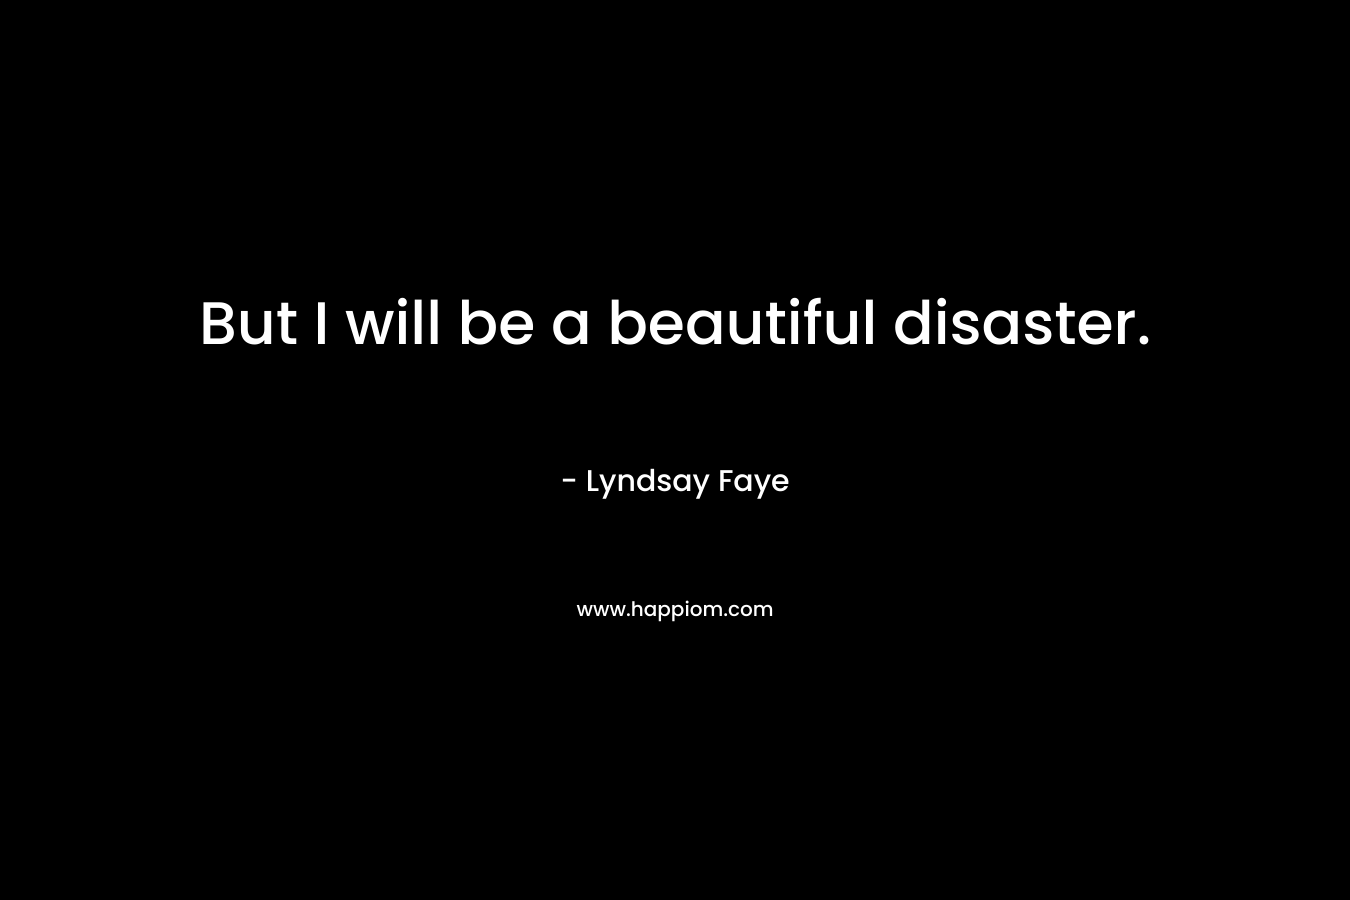 But I will be a beautiful disaster. – Lyndsay Faye